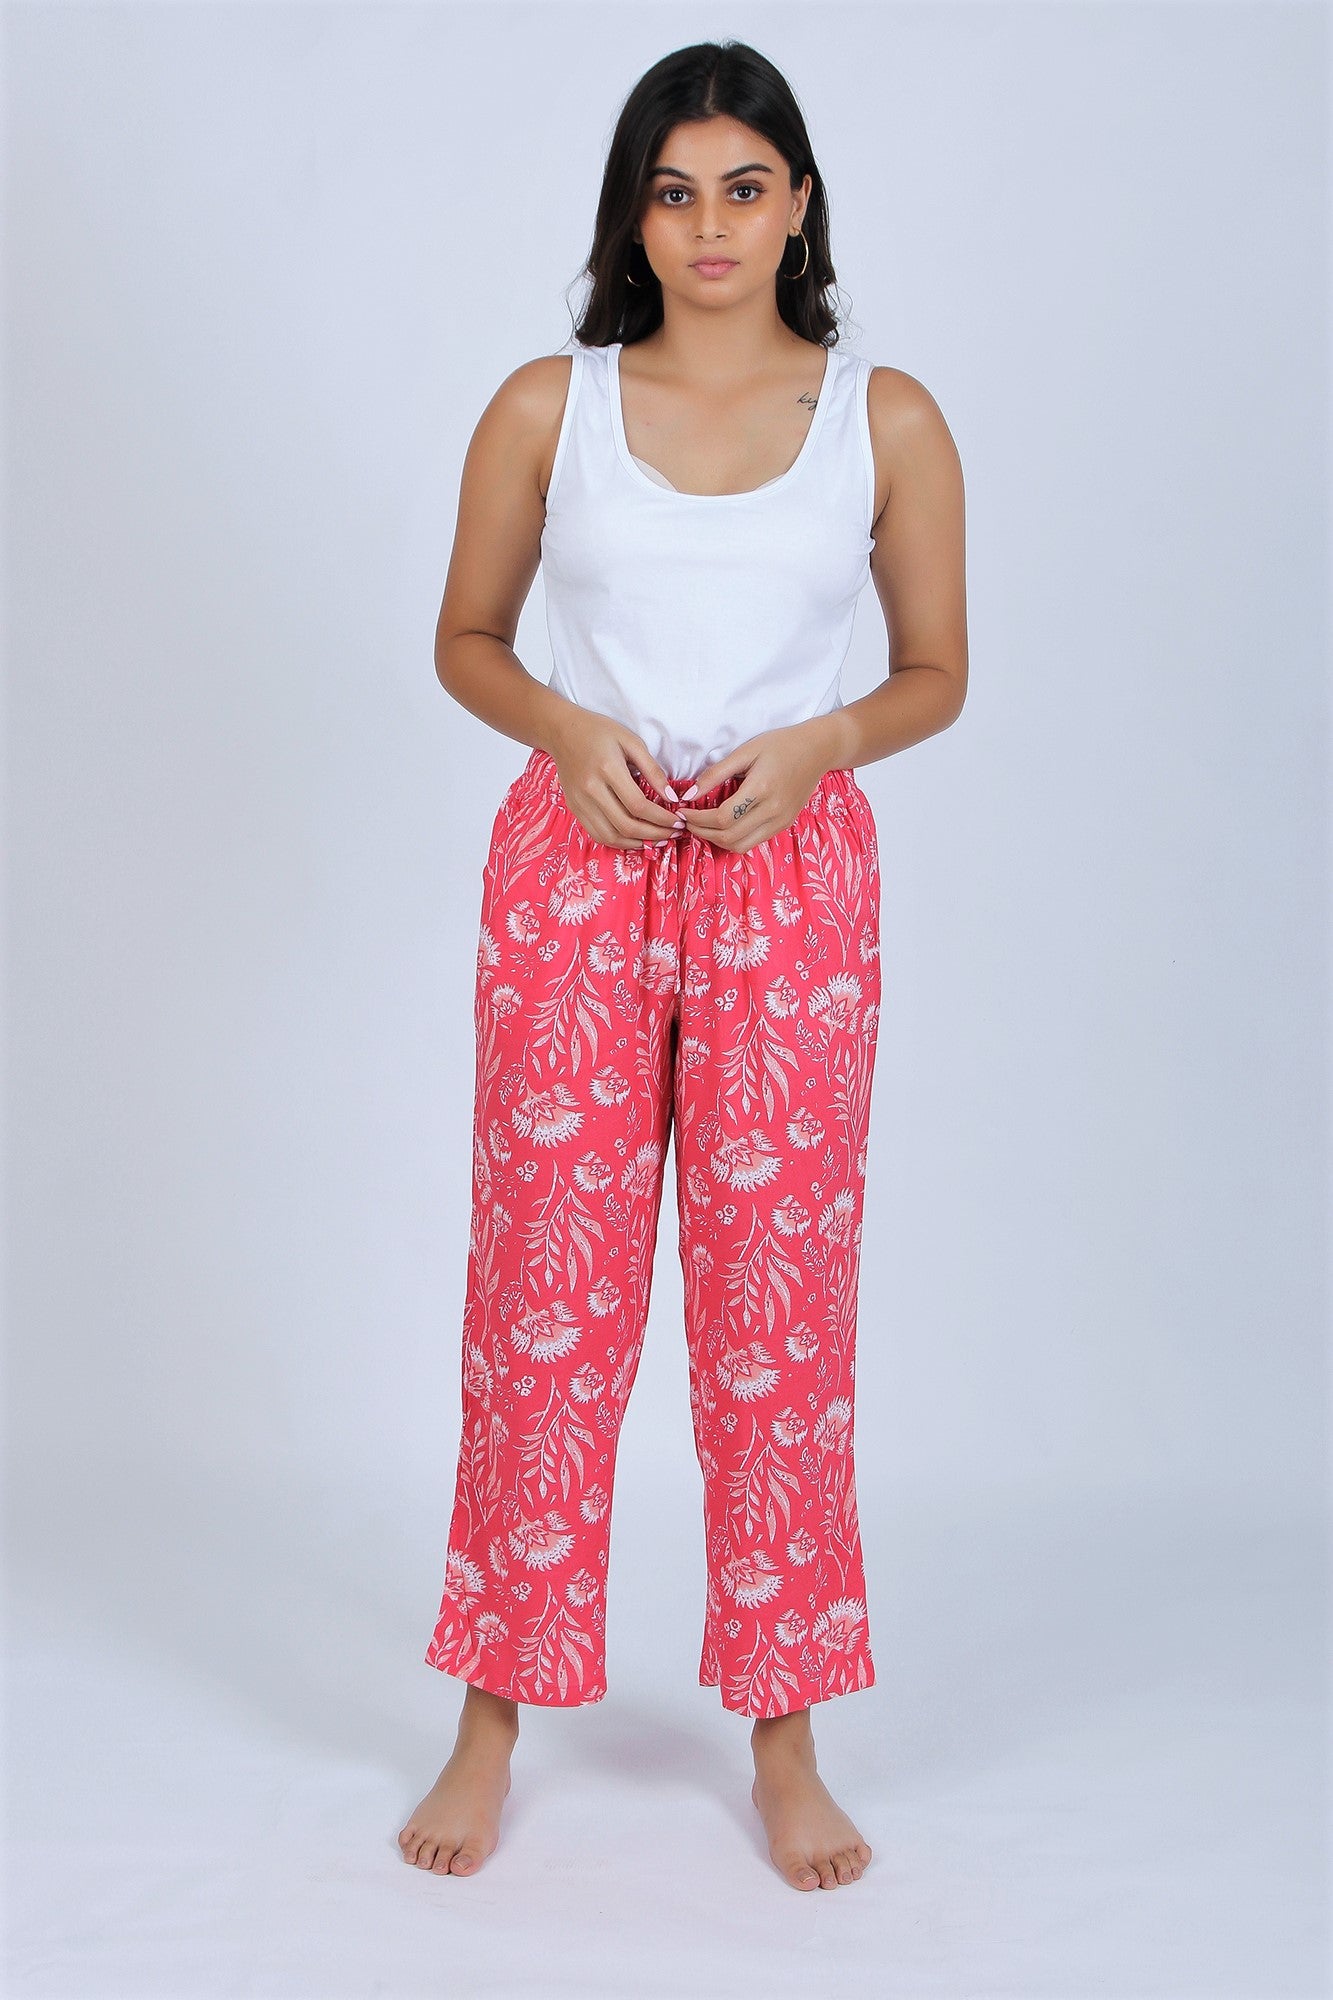 Buy women wine lounge pants online at the best price in India - Inwear.